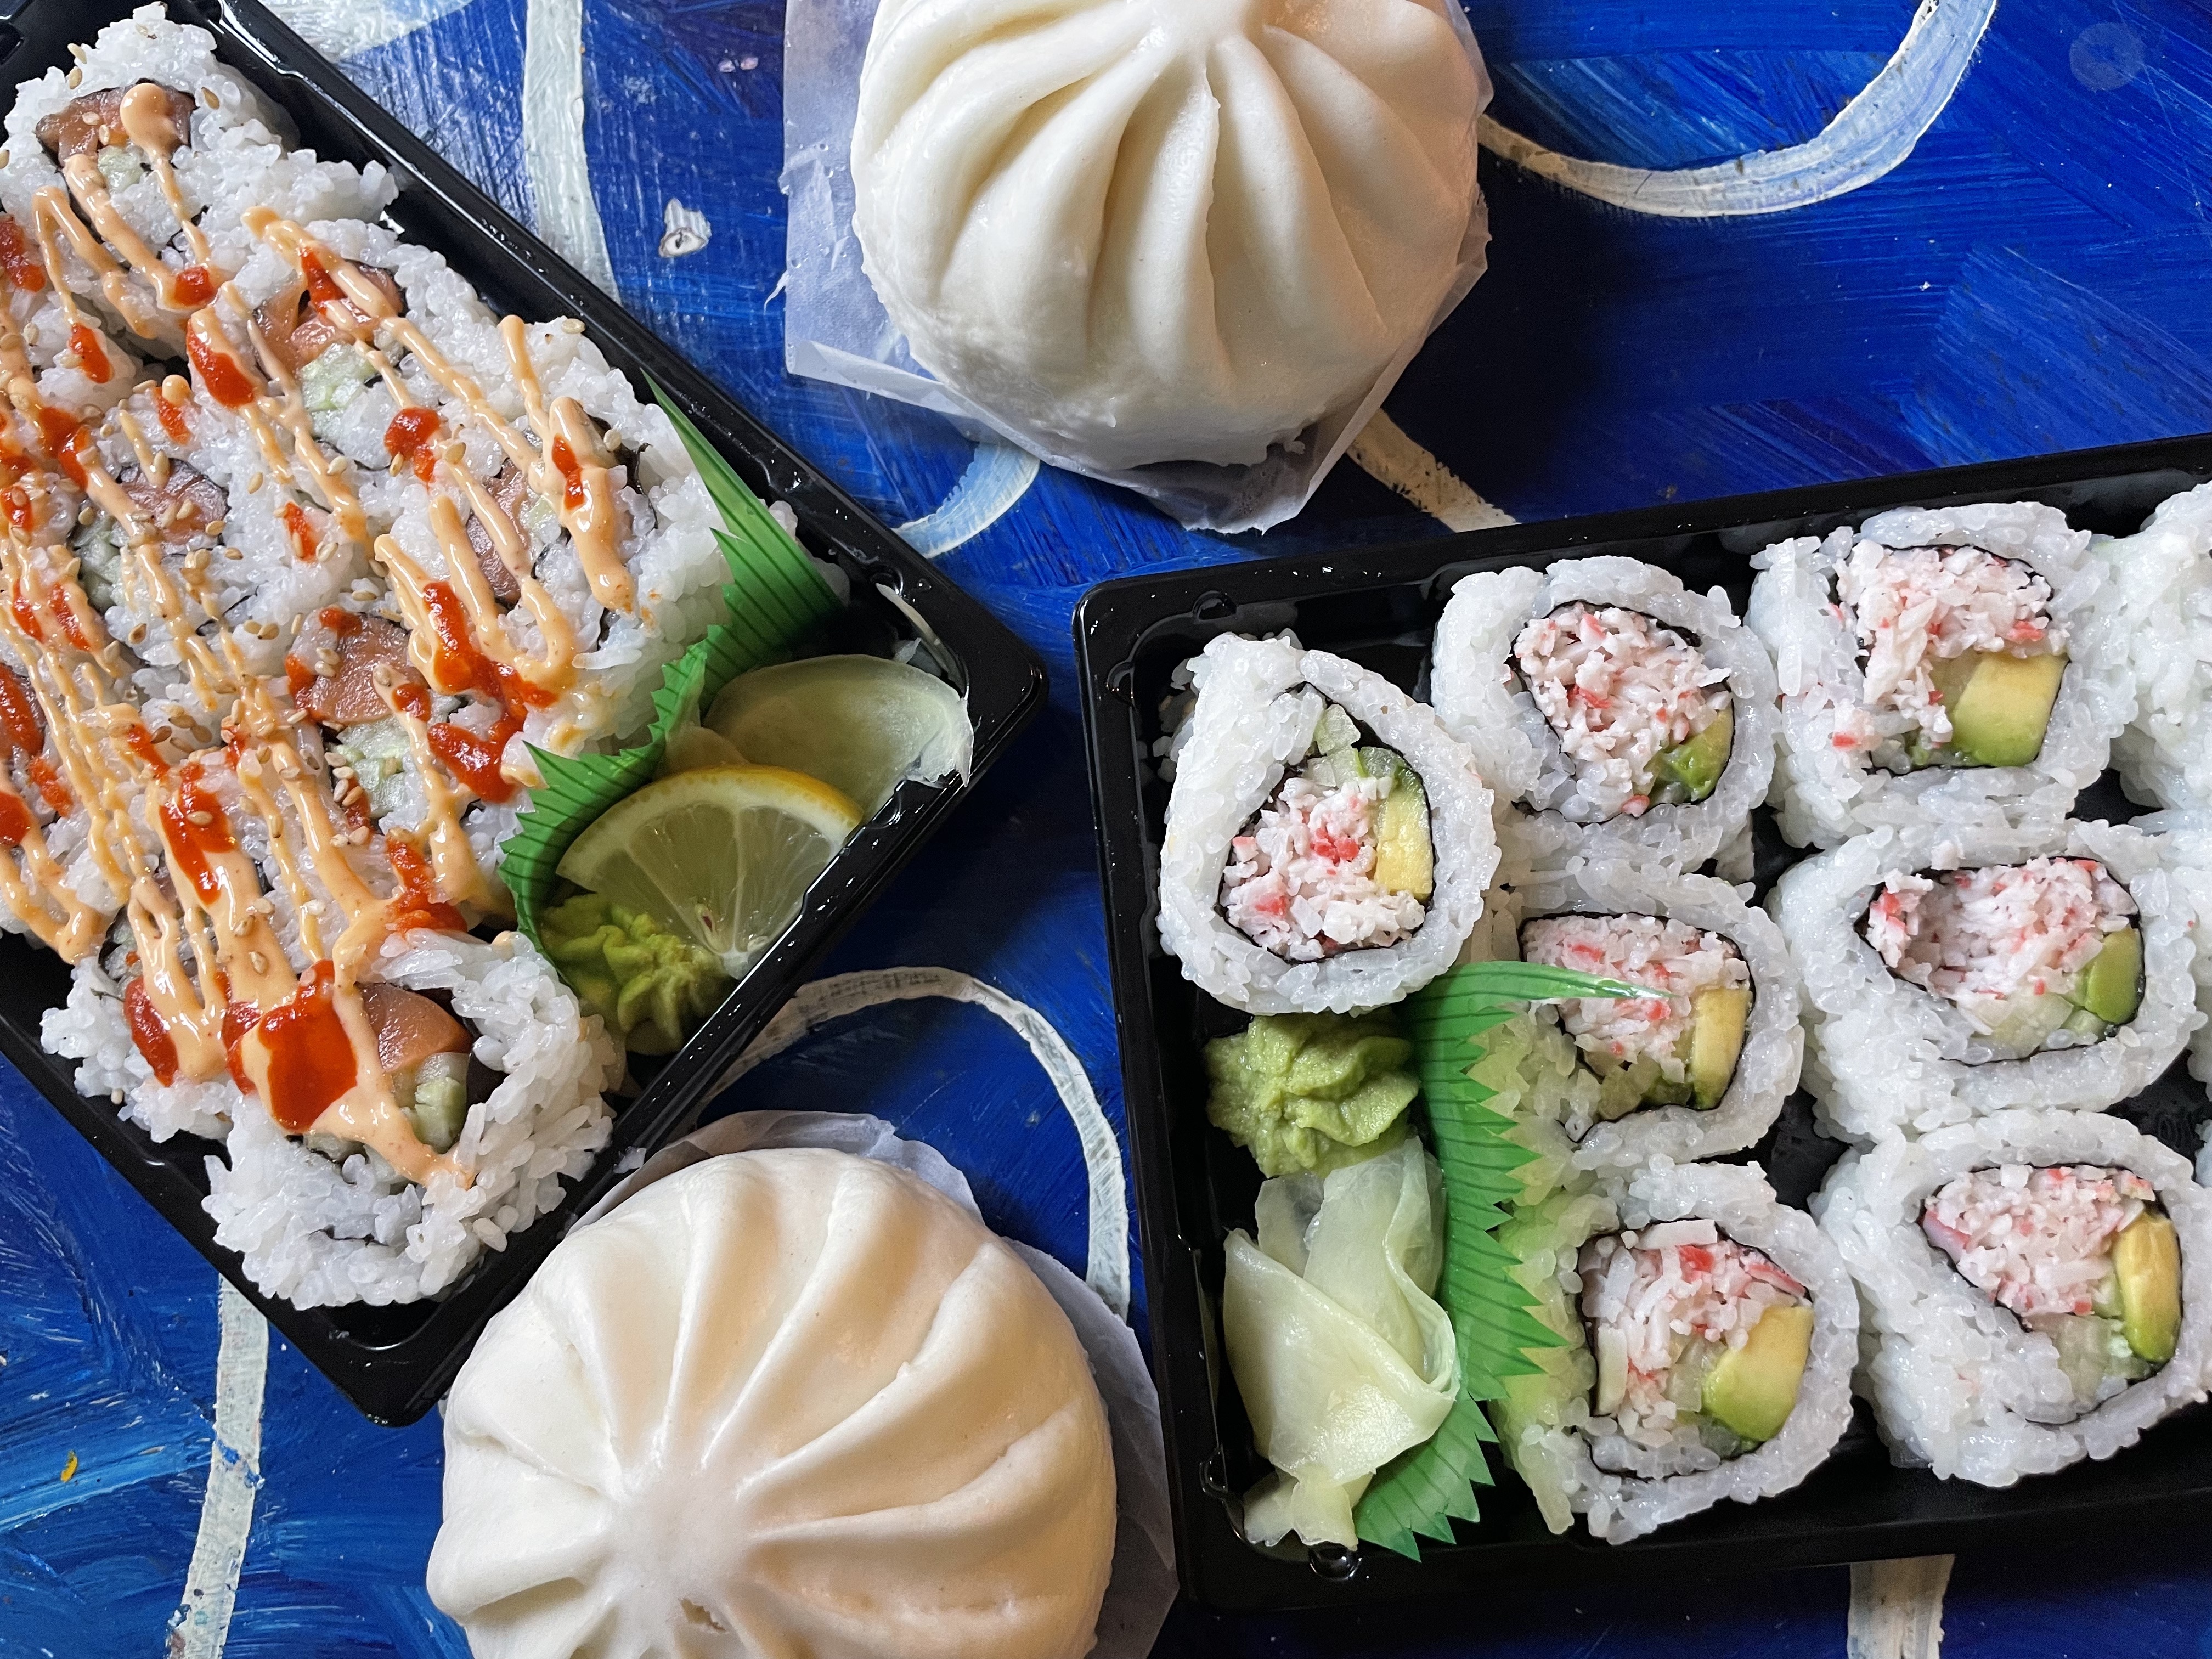 710 Mart’s grab-and-go sushi returns